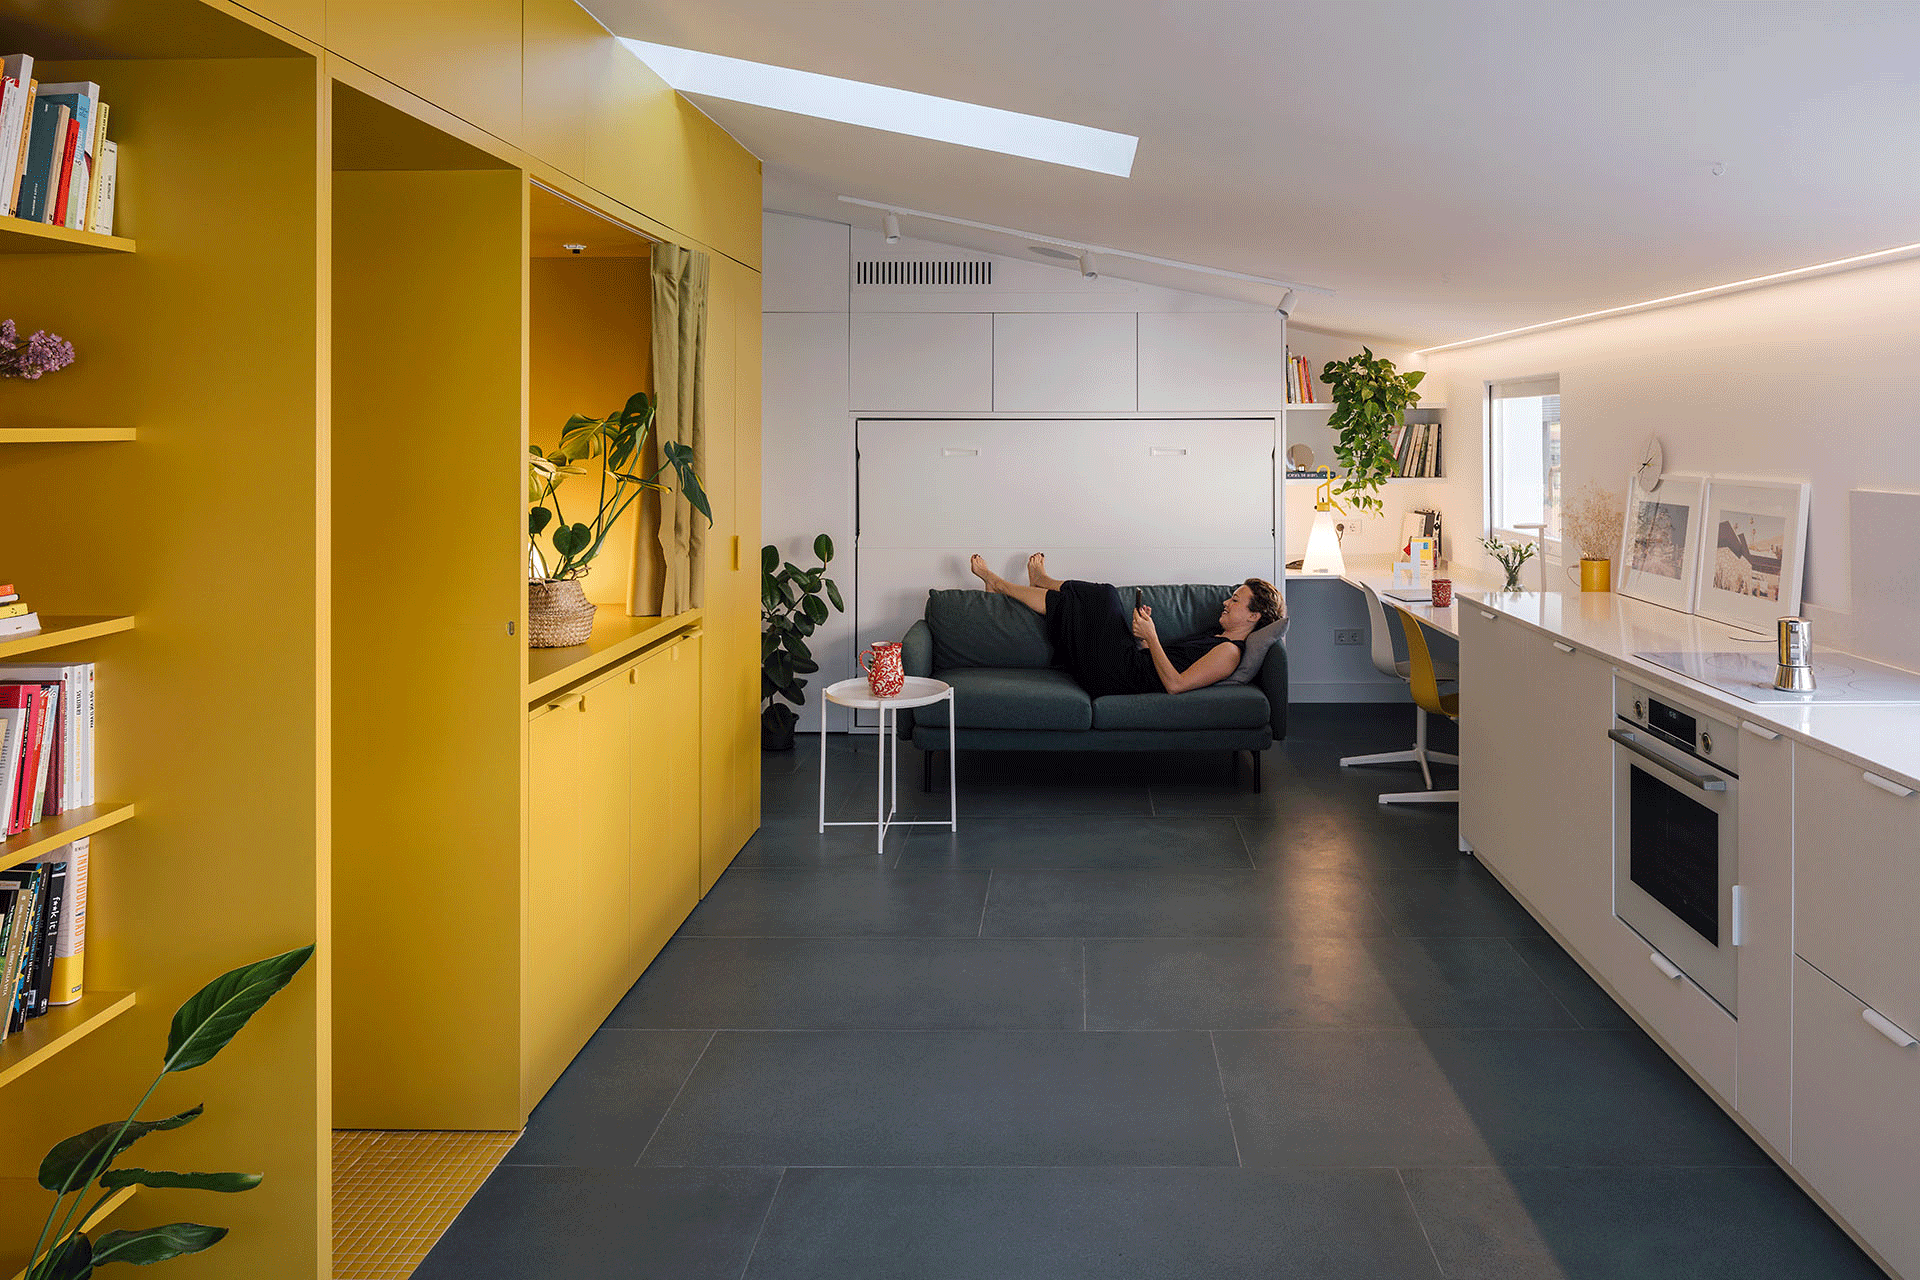 Tiny Apartment With Space-Saving Multifunctional Furniture